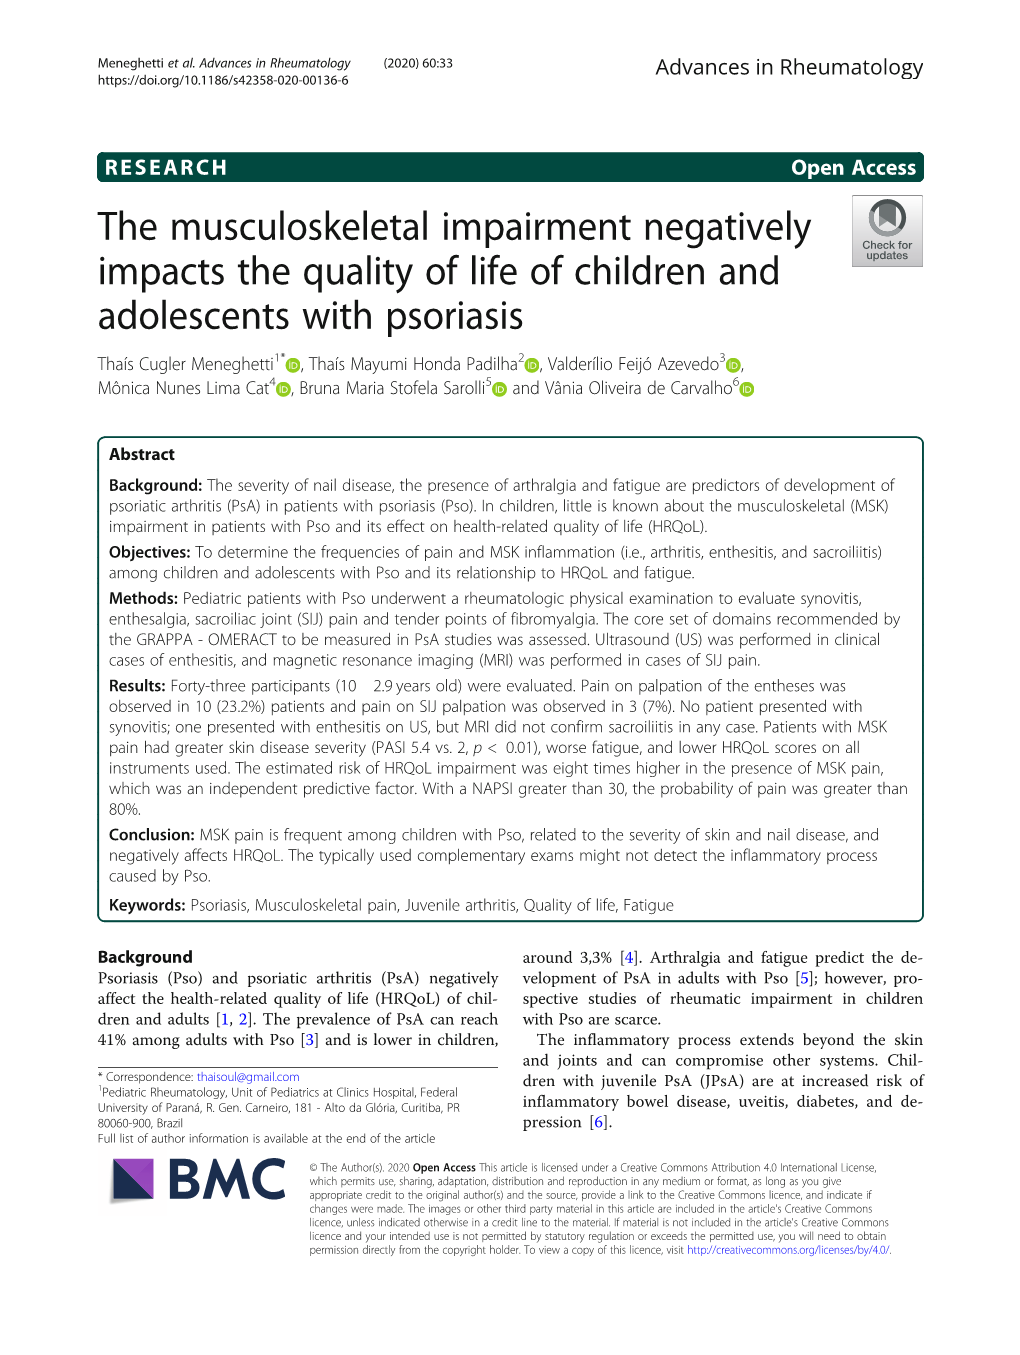 The Musculoskeletal Impairment Negatively Impacts the Quality of Life of Children and Adolescents with Psoriasis